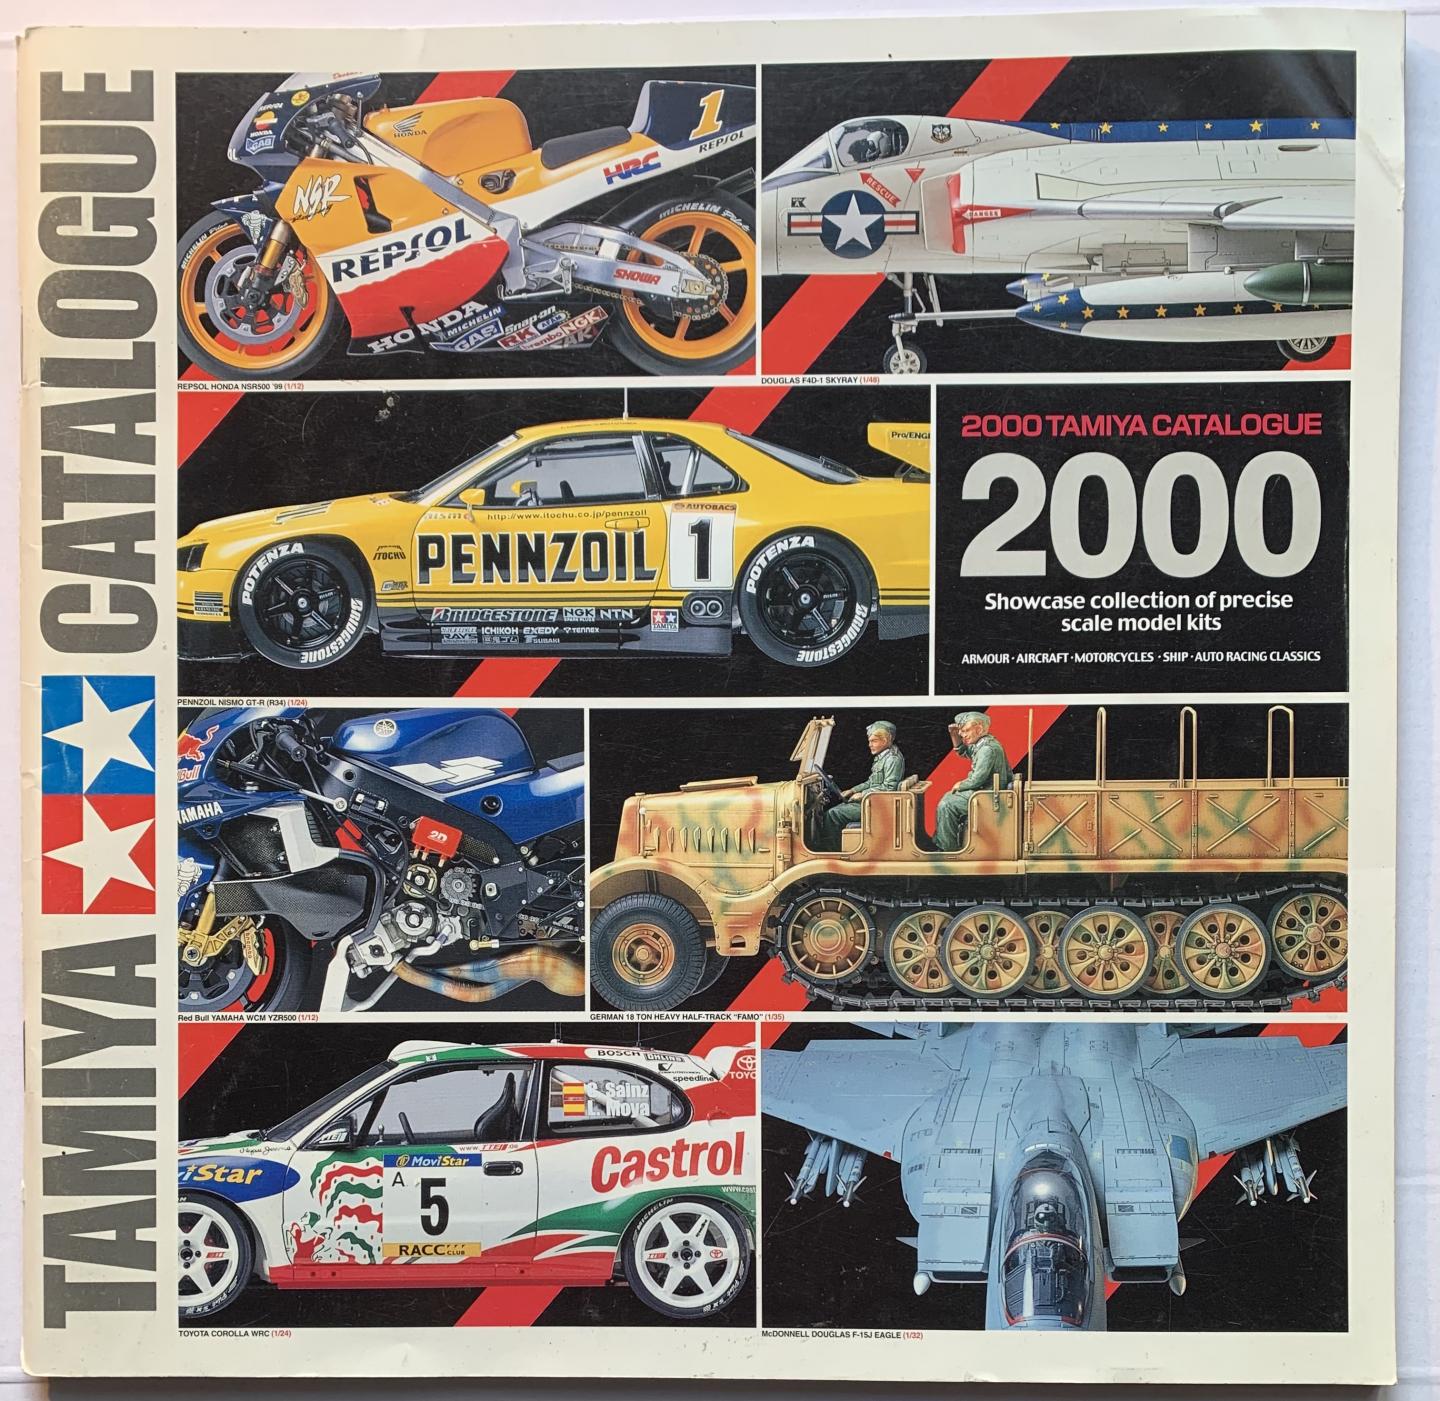 N.N. - 2000. Tamiya Catalogue. Showcase Collection precise scale model kits; armour, aircraft, motorcycles, ships, auto racing classics.